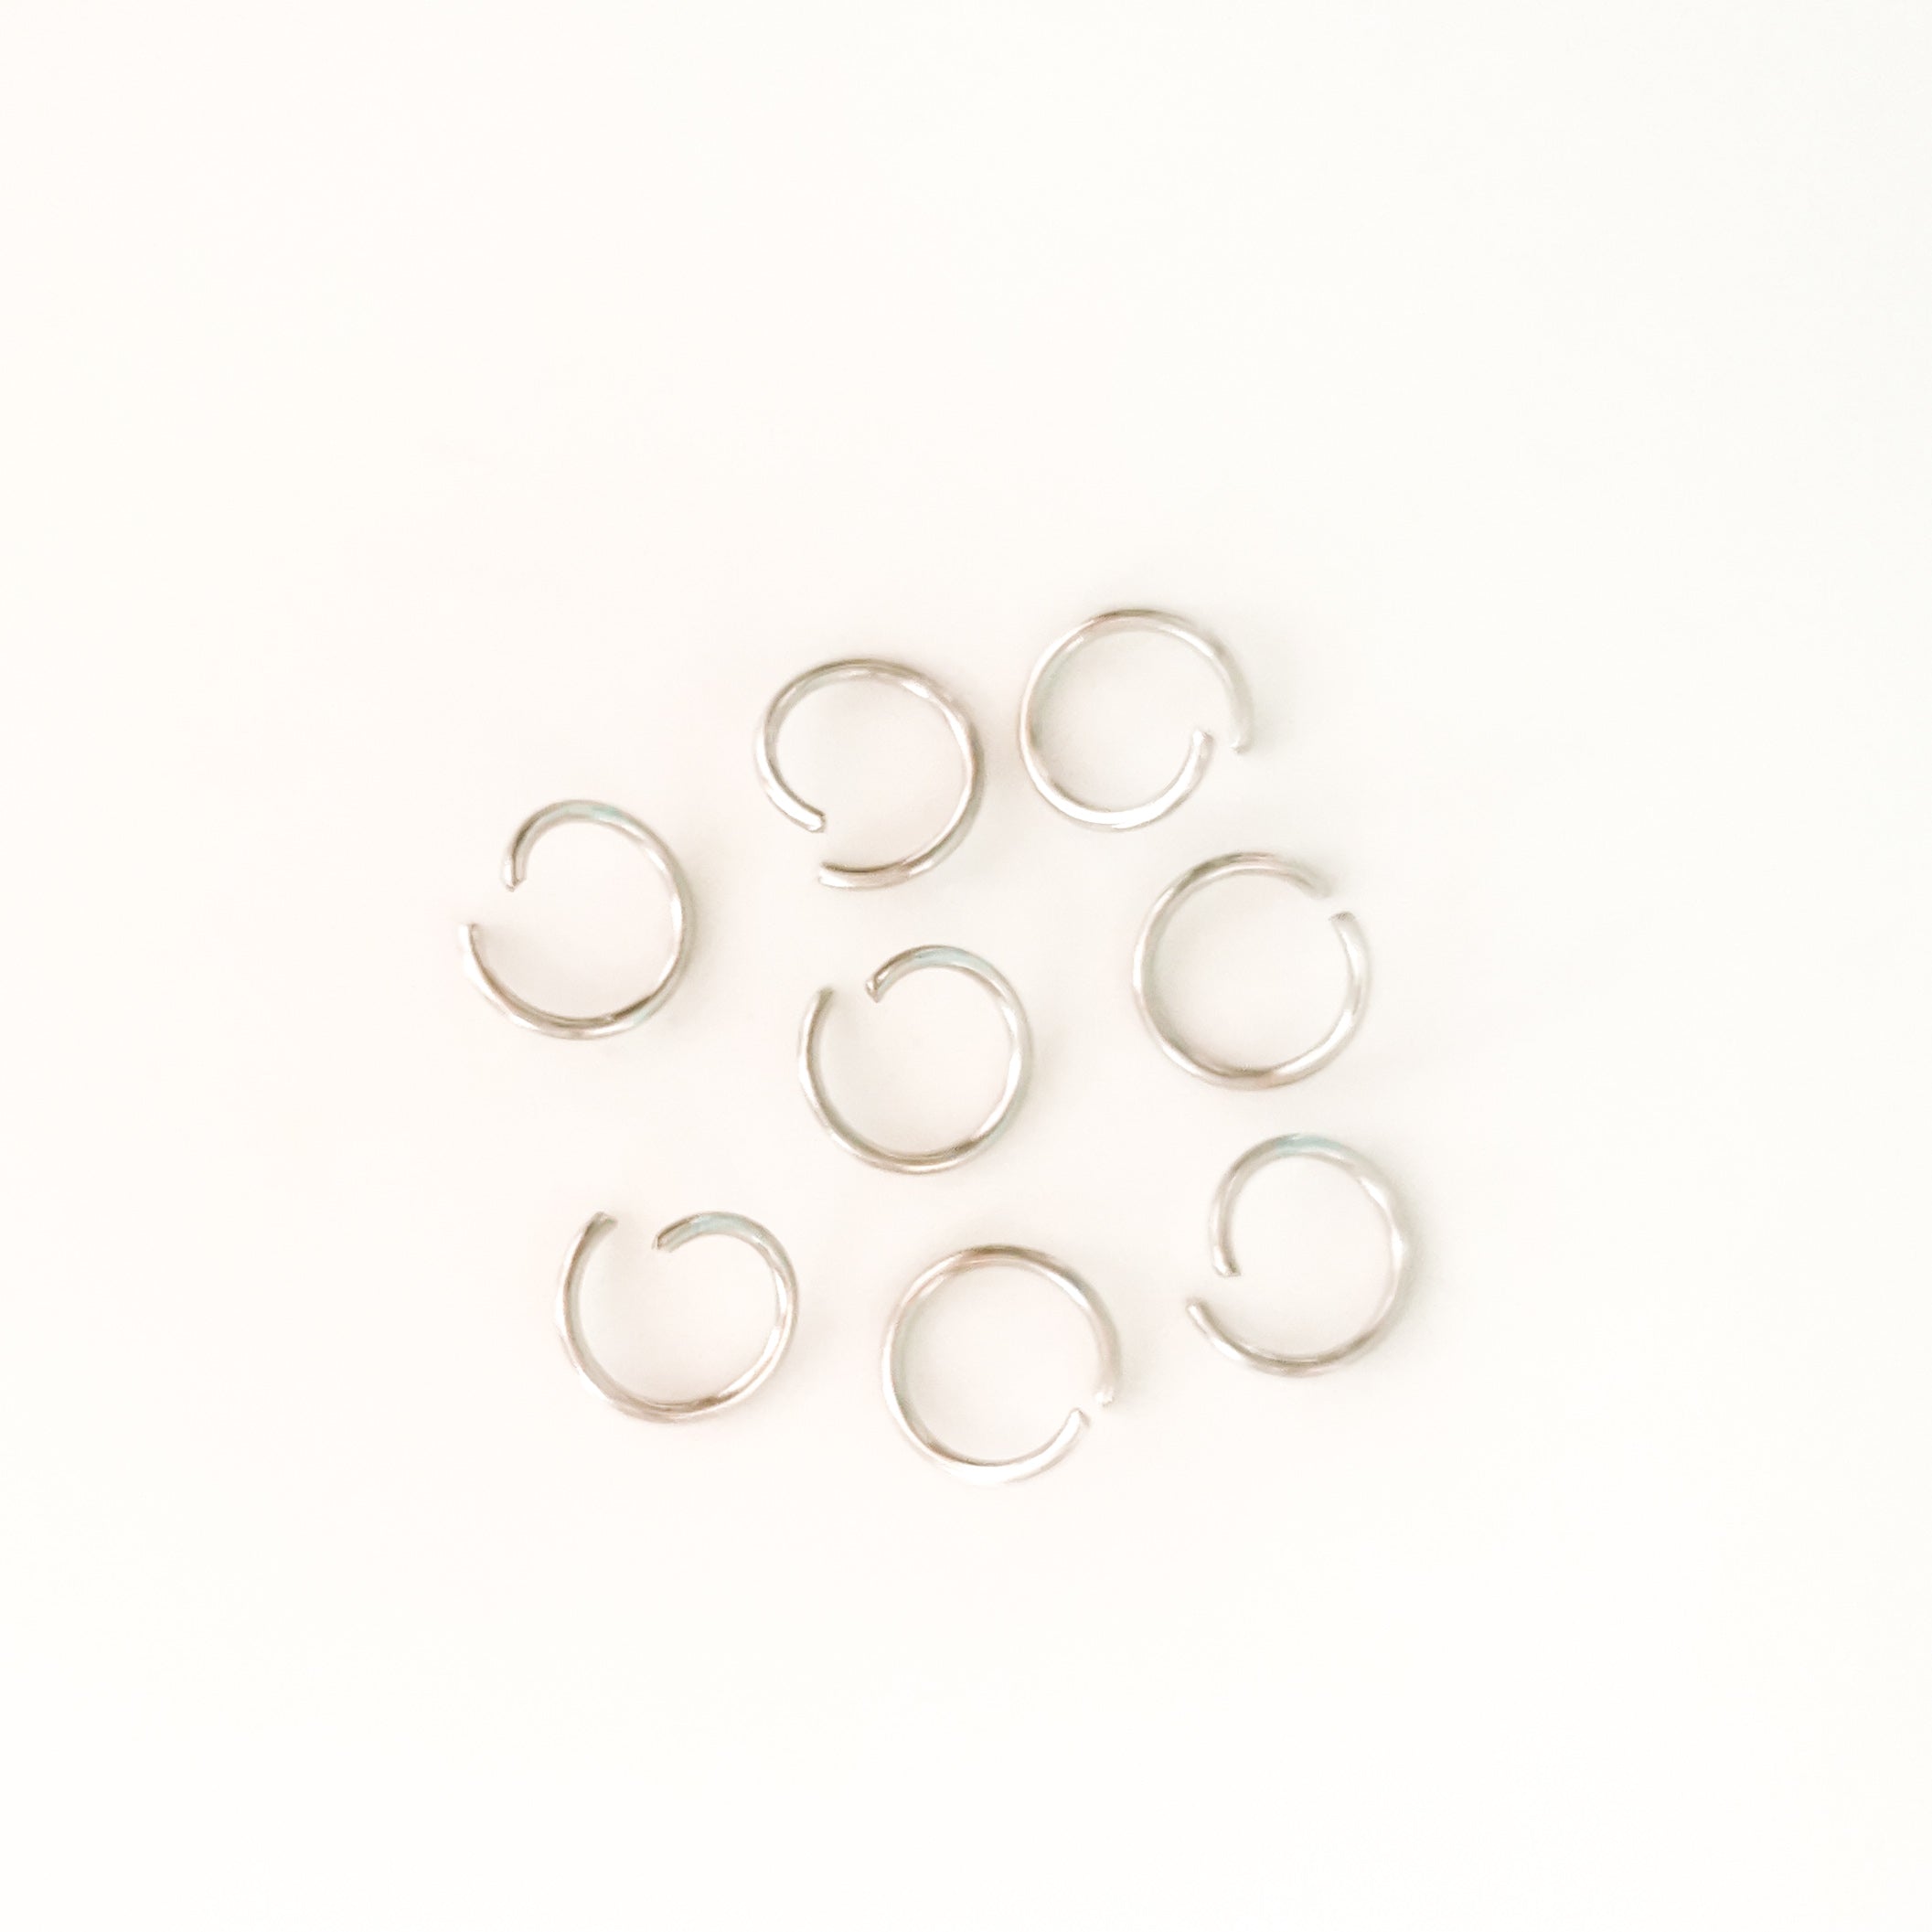 10mm Silver Stainless Steel Jump Rings - 100 pieces